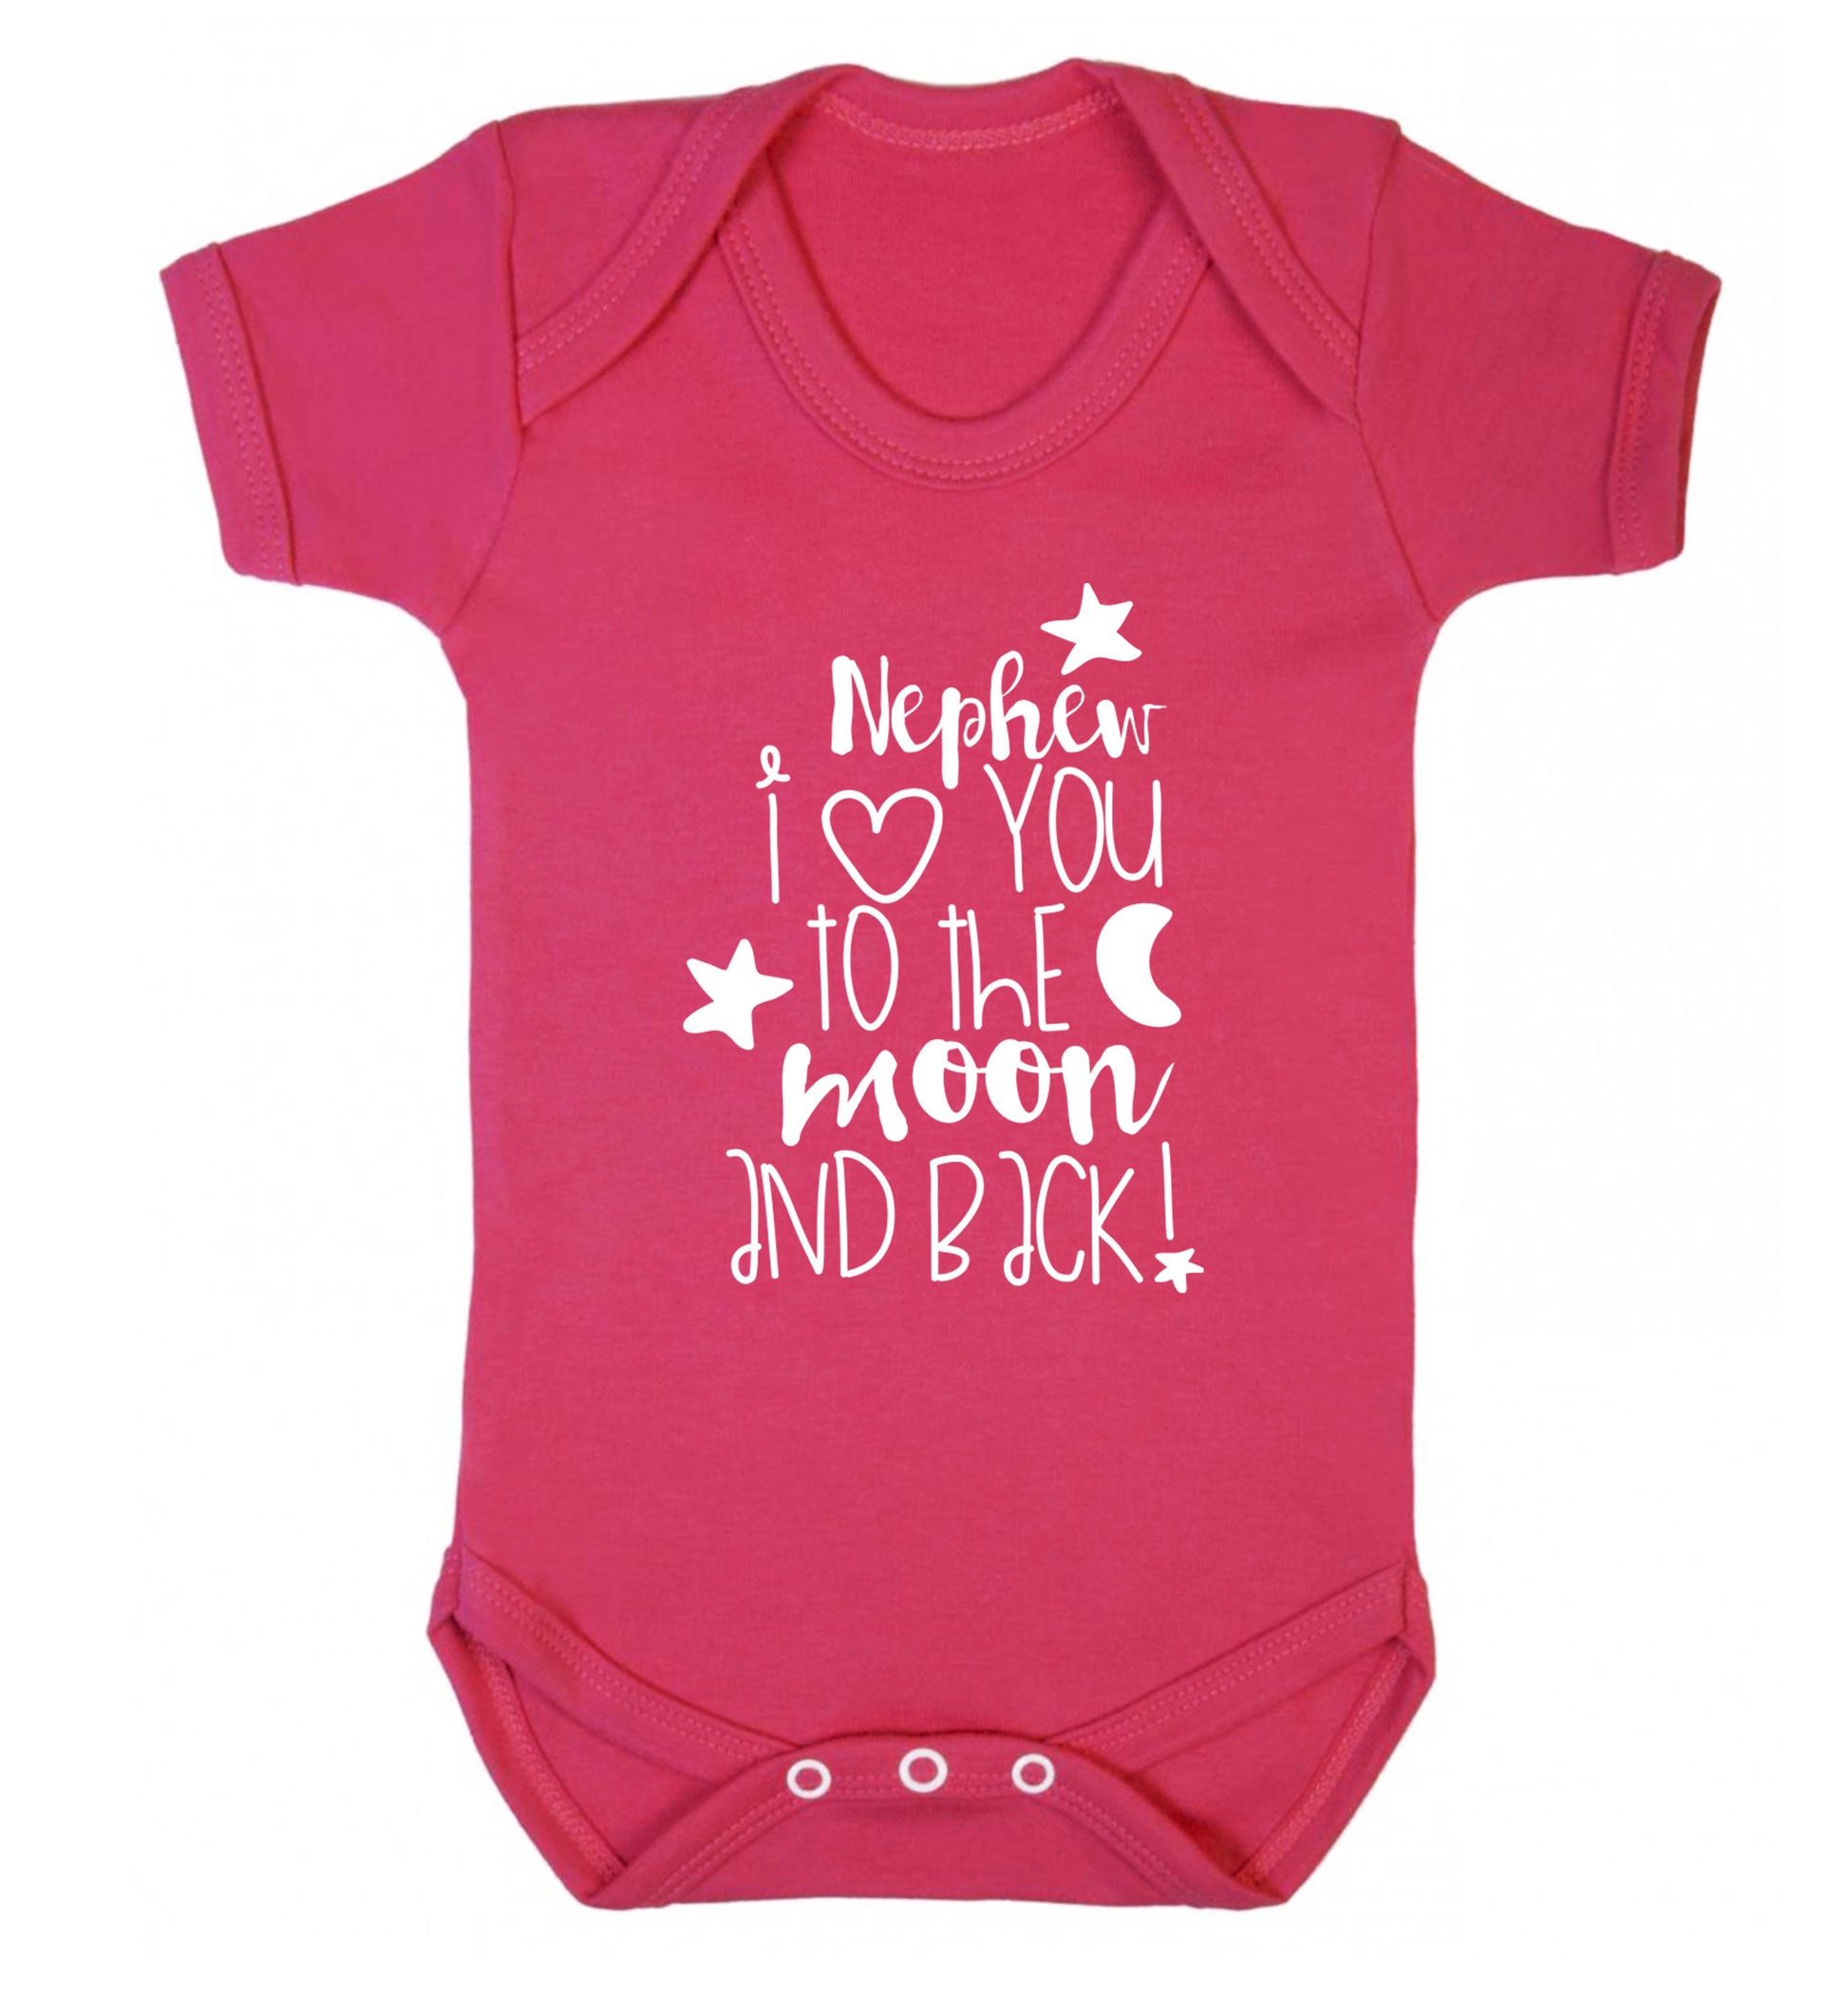 Nephew I love you to the moon and back Baby Vest dark pink 18-24 months